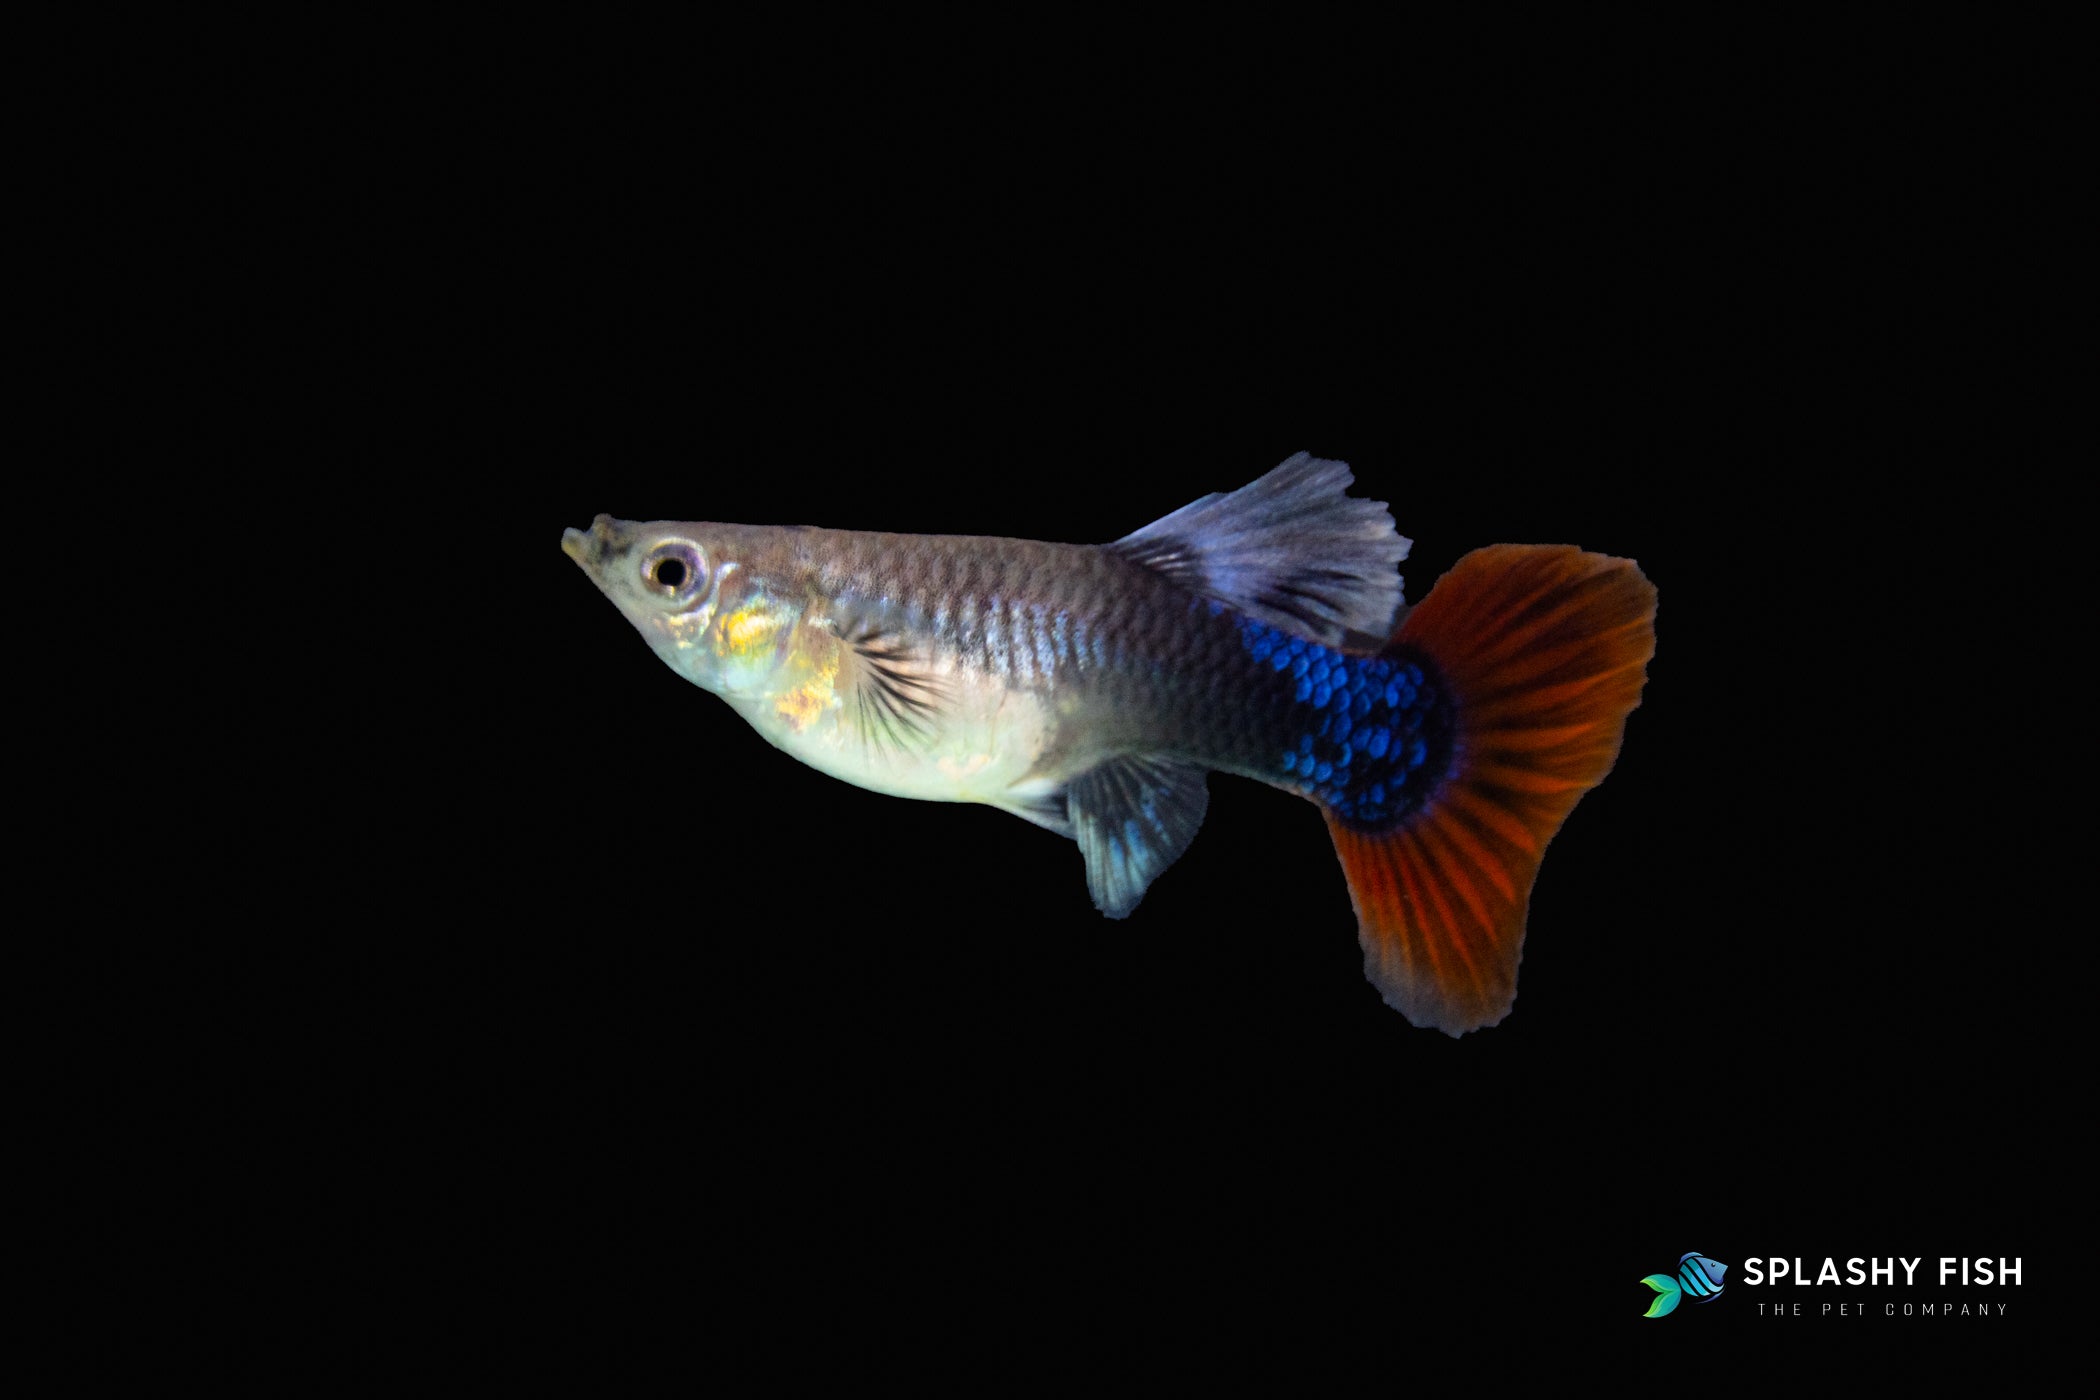 HALFBODY RED ROSE GUPPY FISH FEMALE FOR SALE